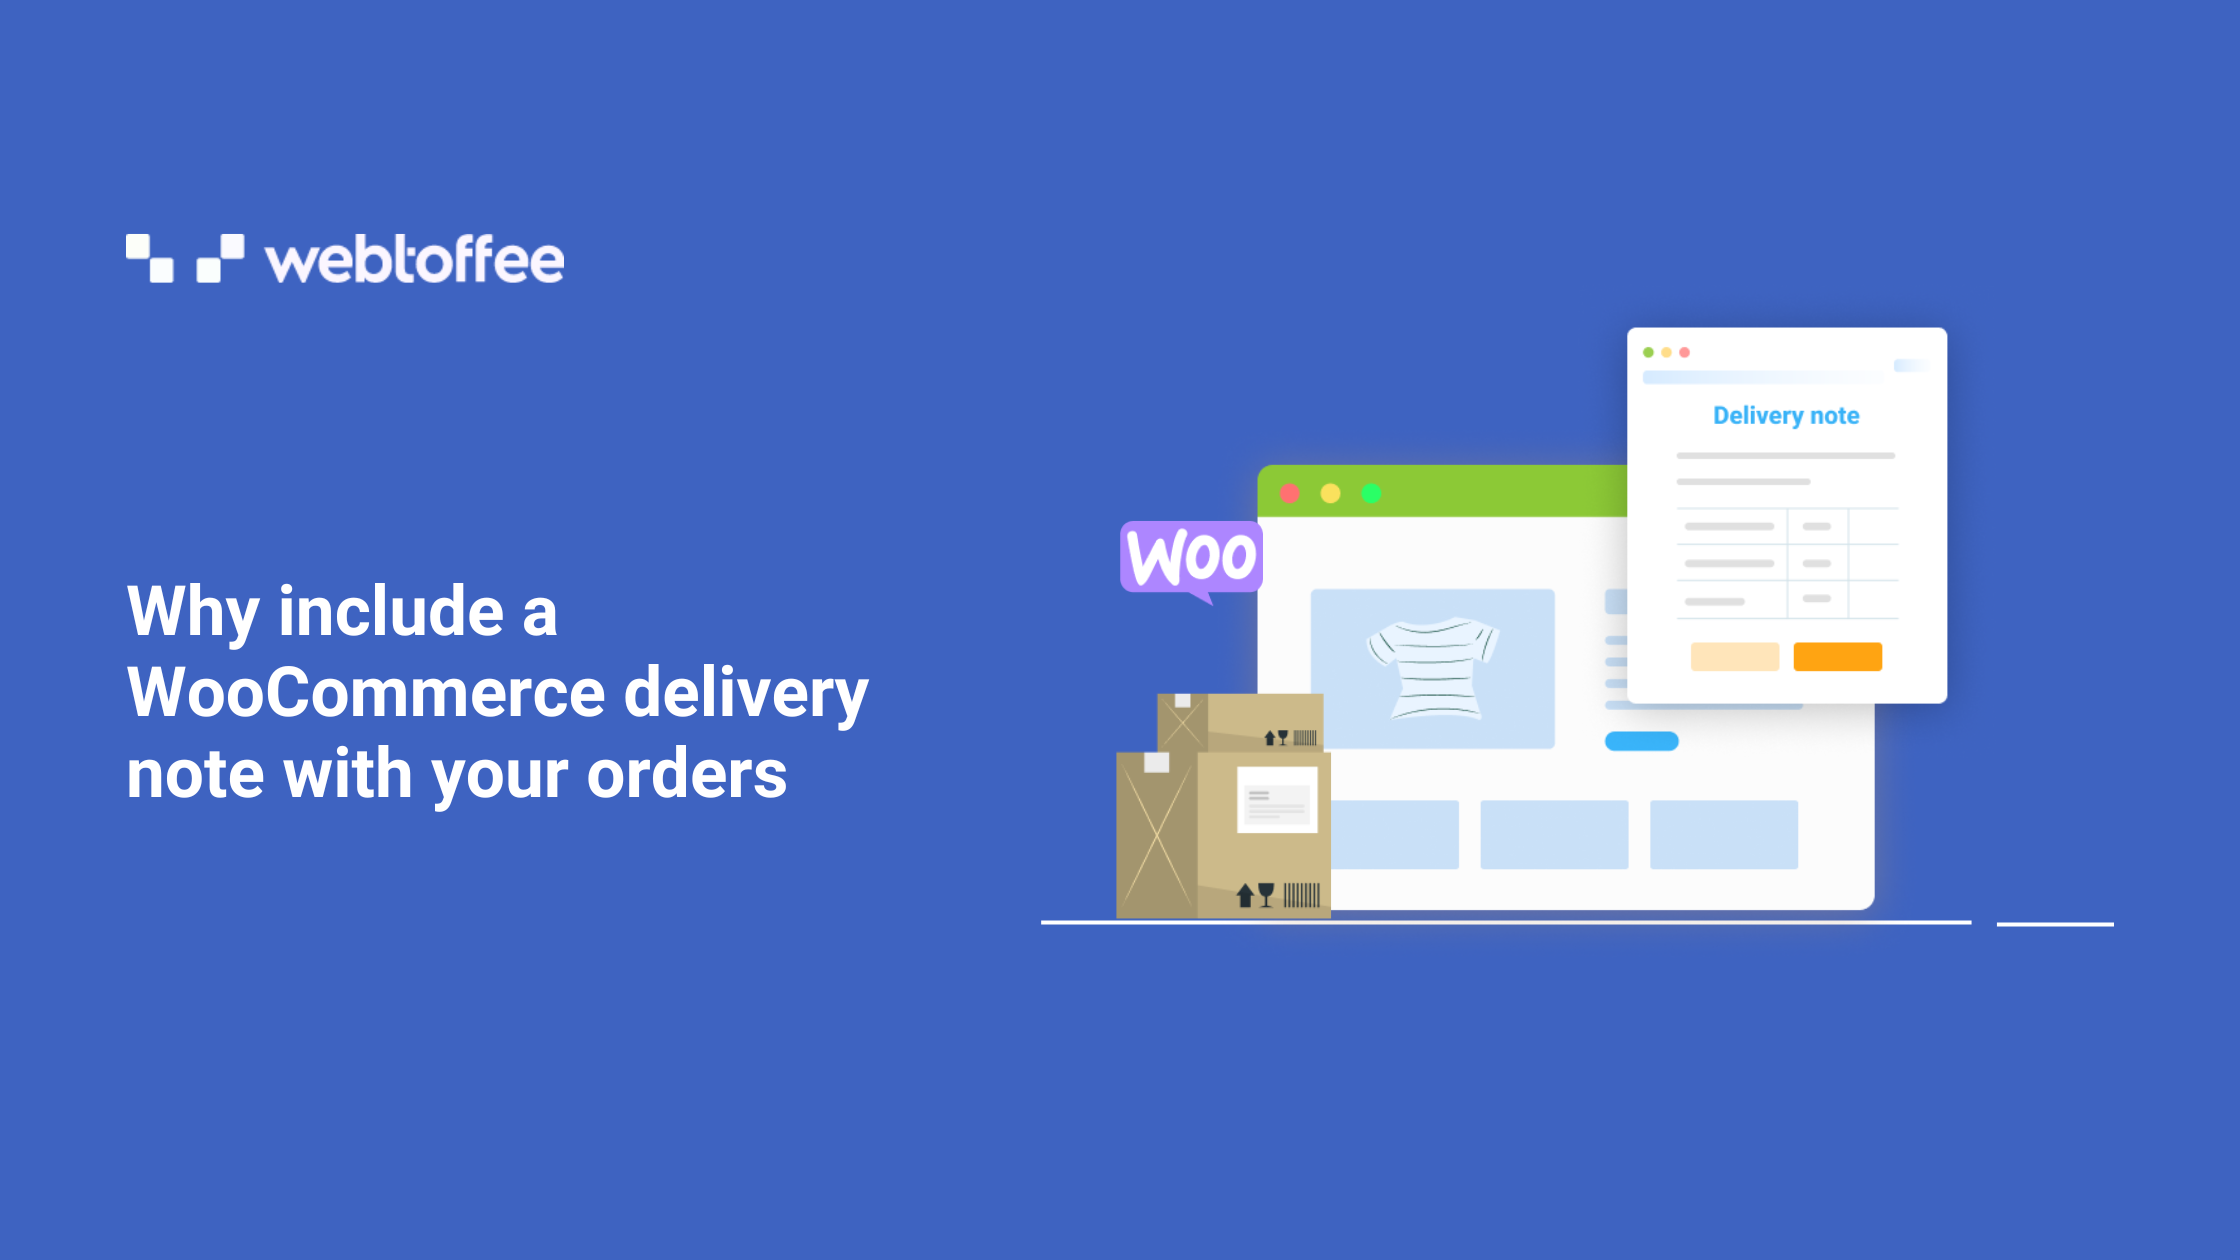 Why include a WooCommerce delivery note with your orders